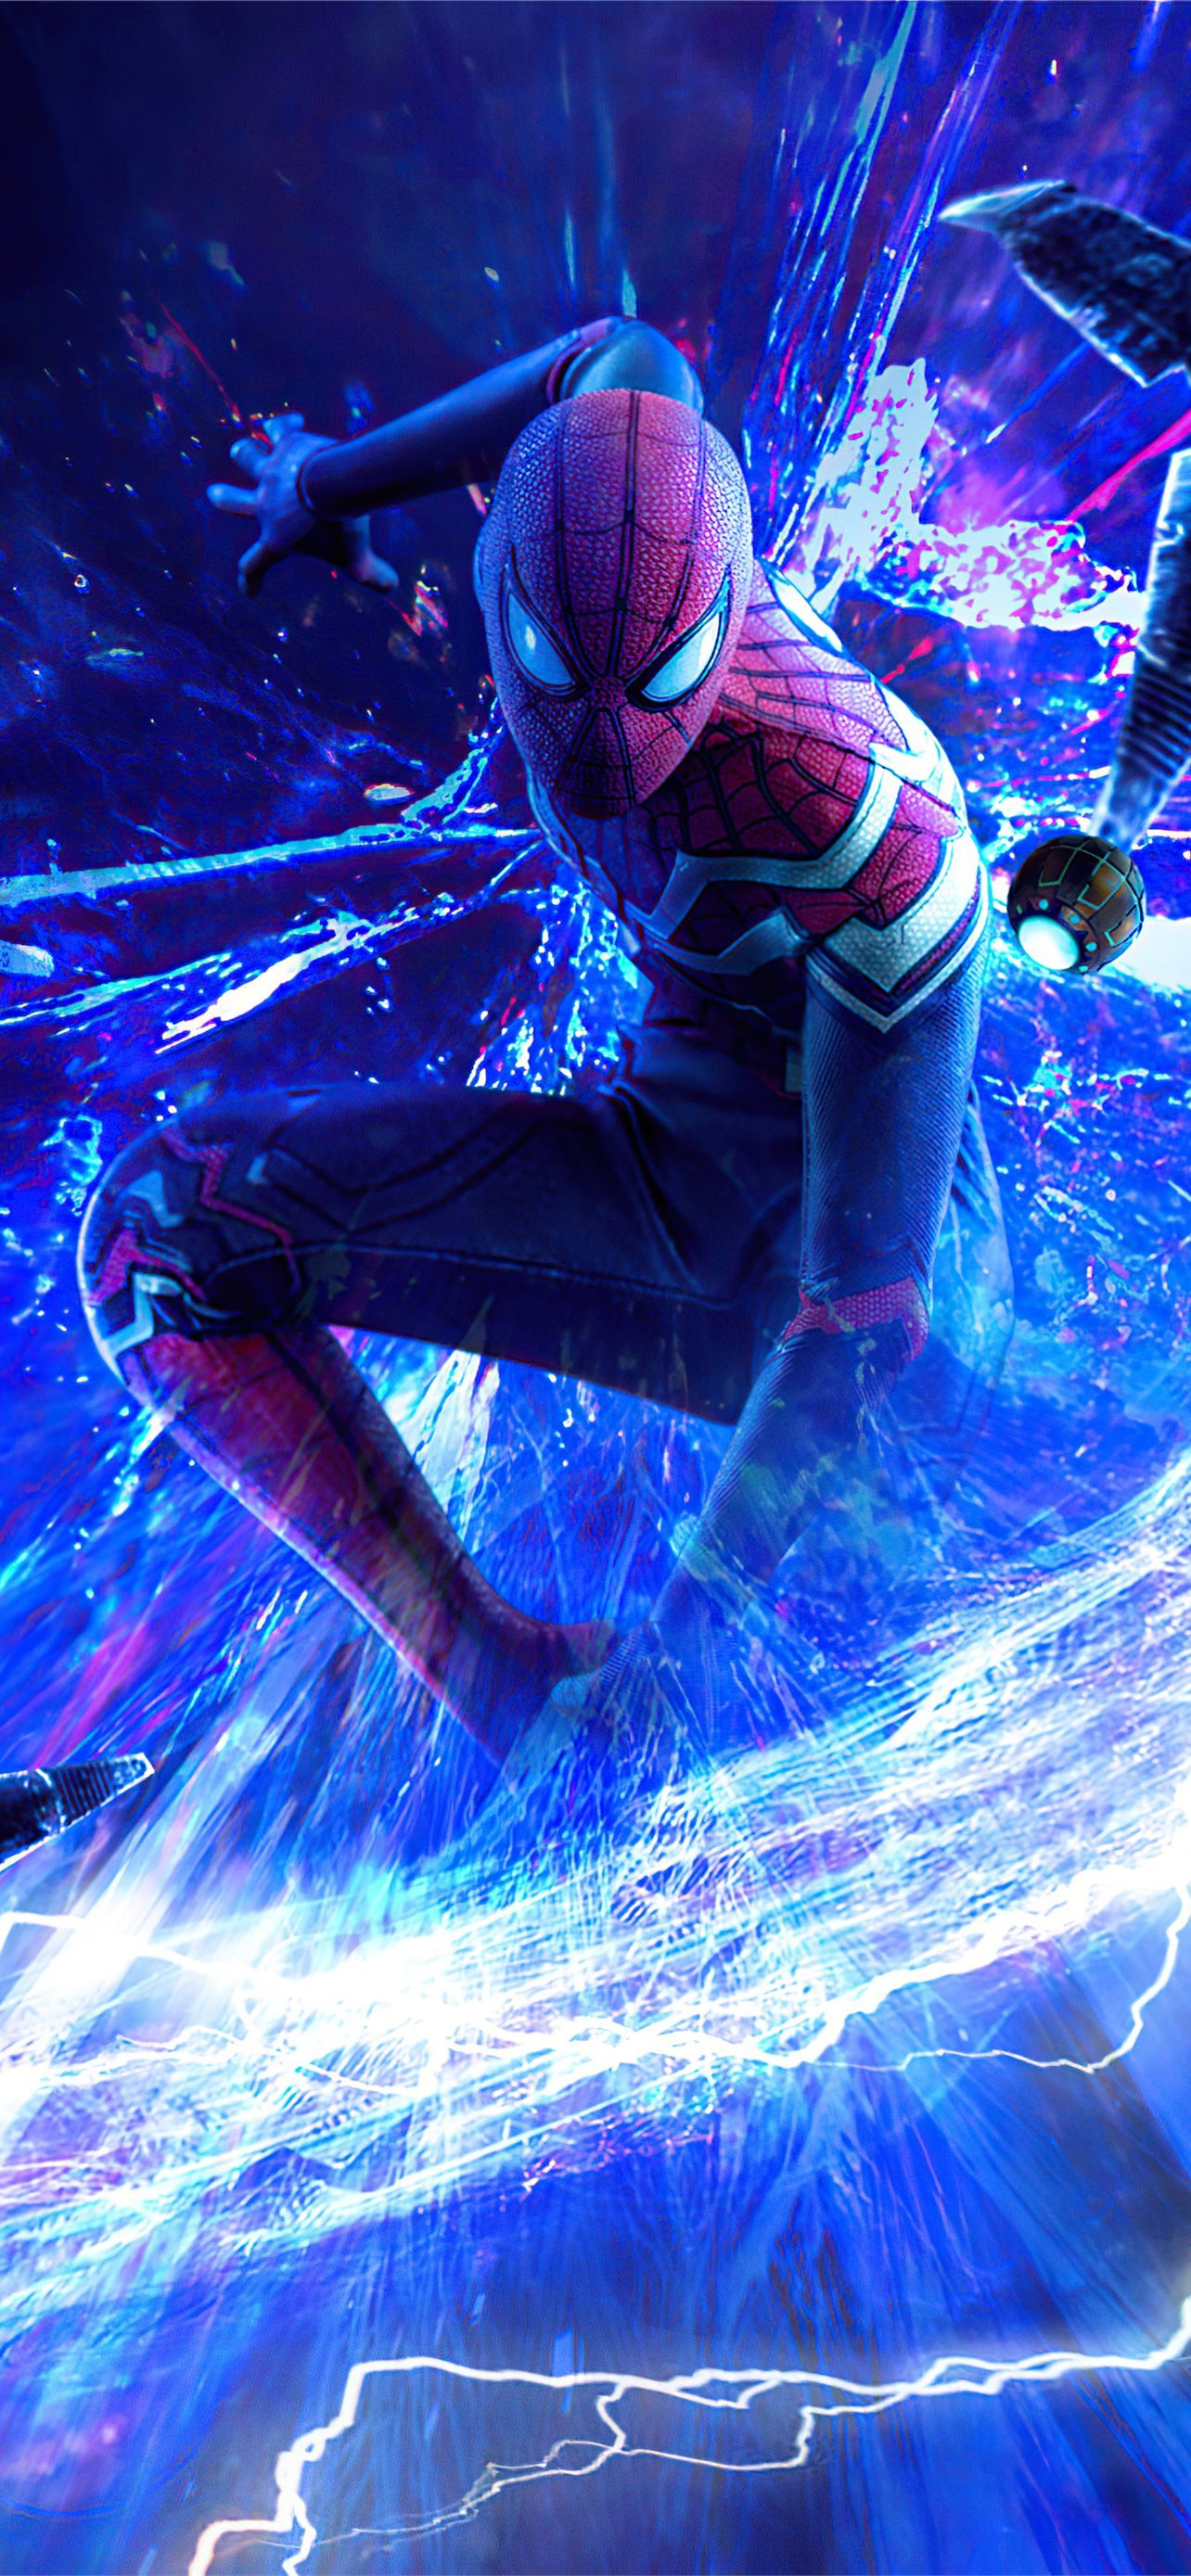 Wallpaper Spiderman anime blue background 3840x2160 UHD 4K Picture Image